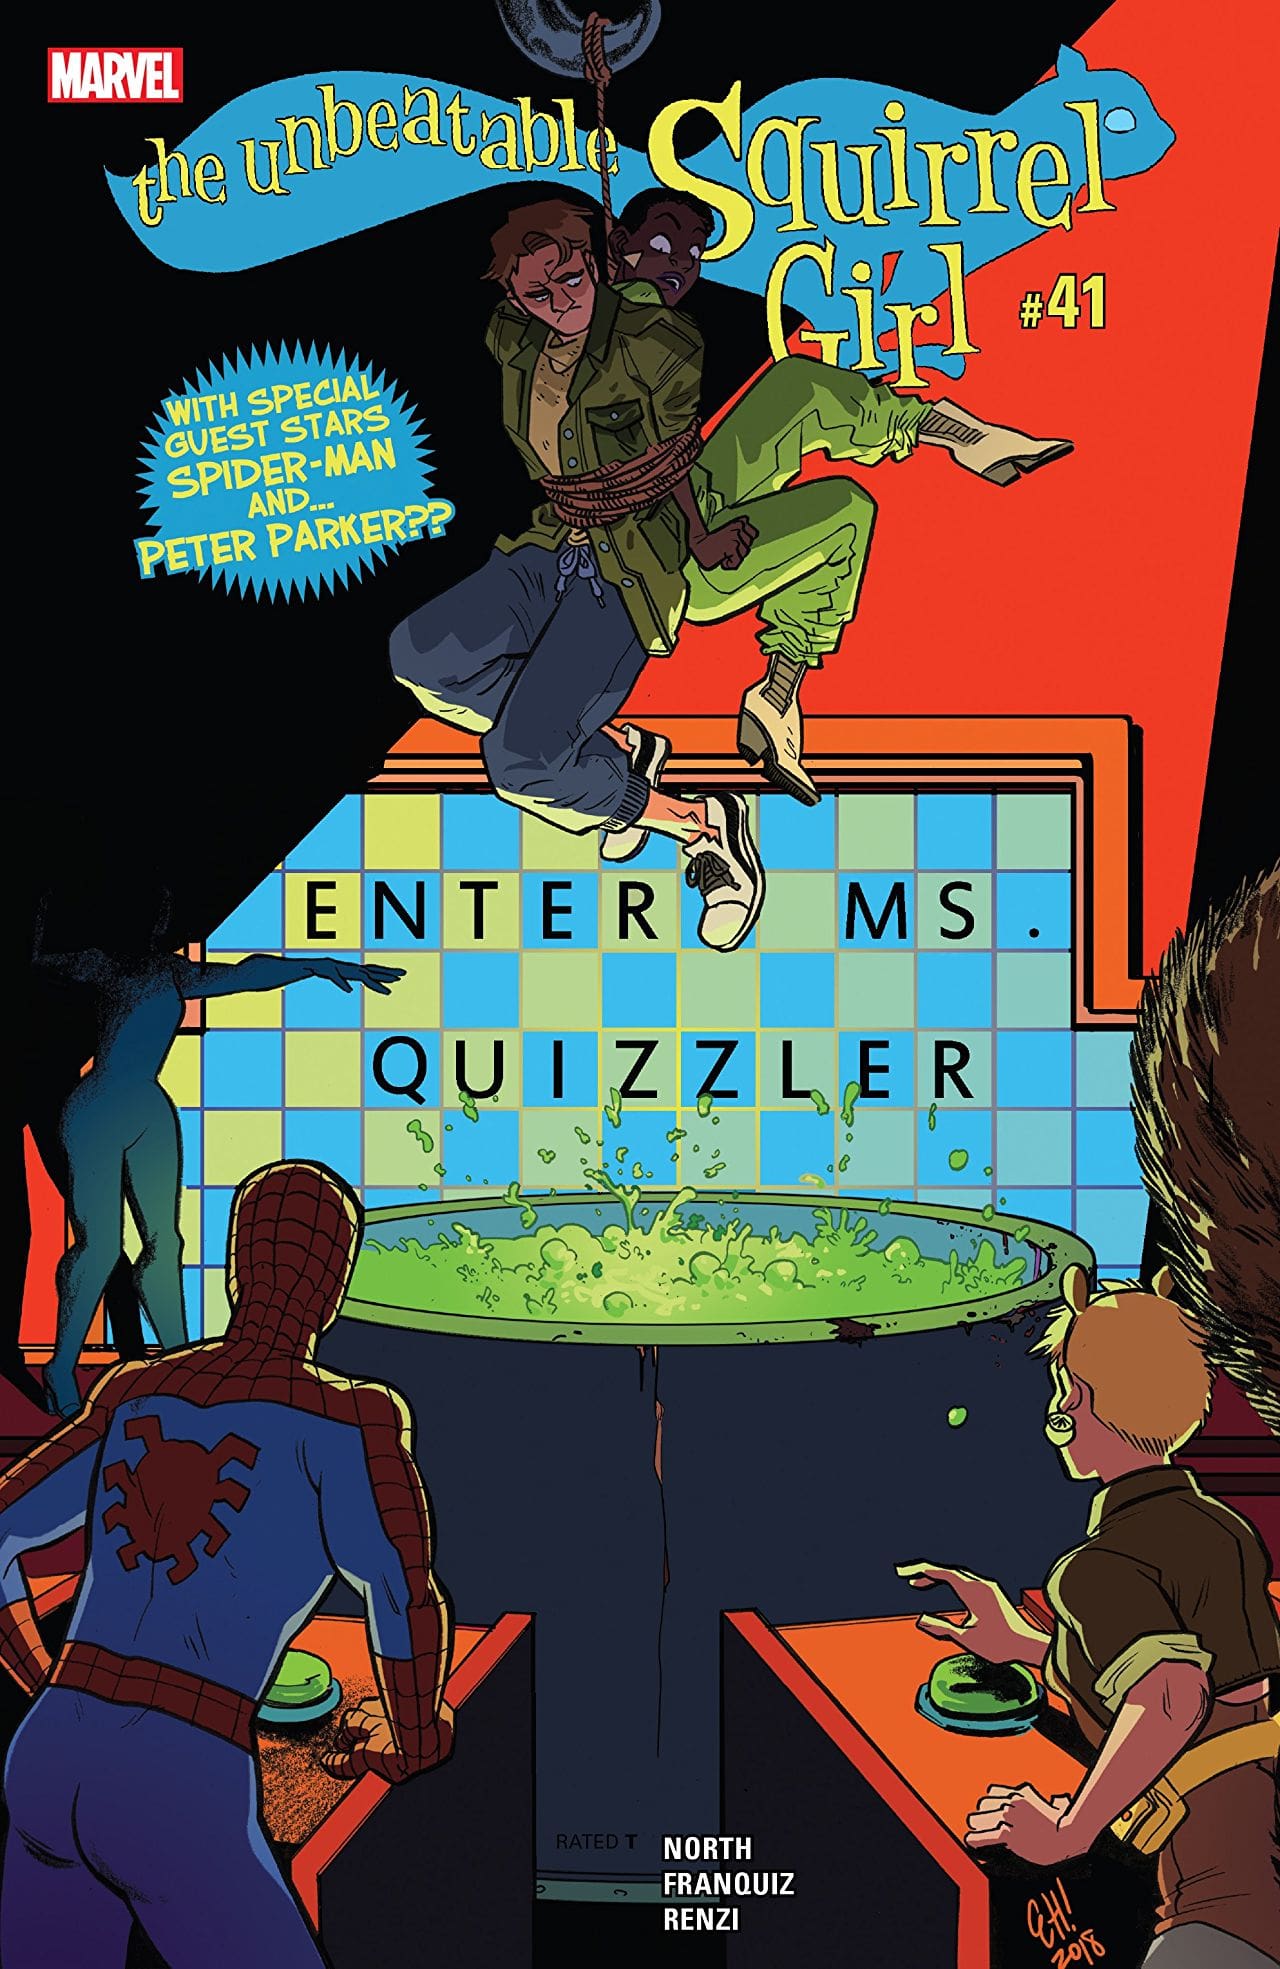 The Unbeatable Squirrel Girl #41 review: Puzzle me this...